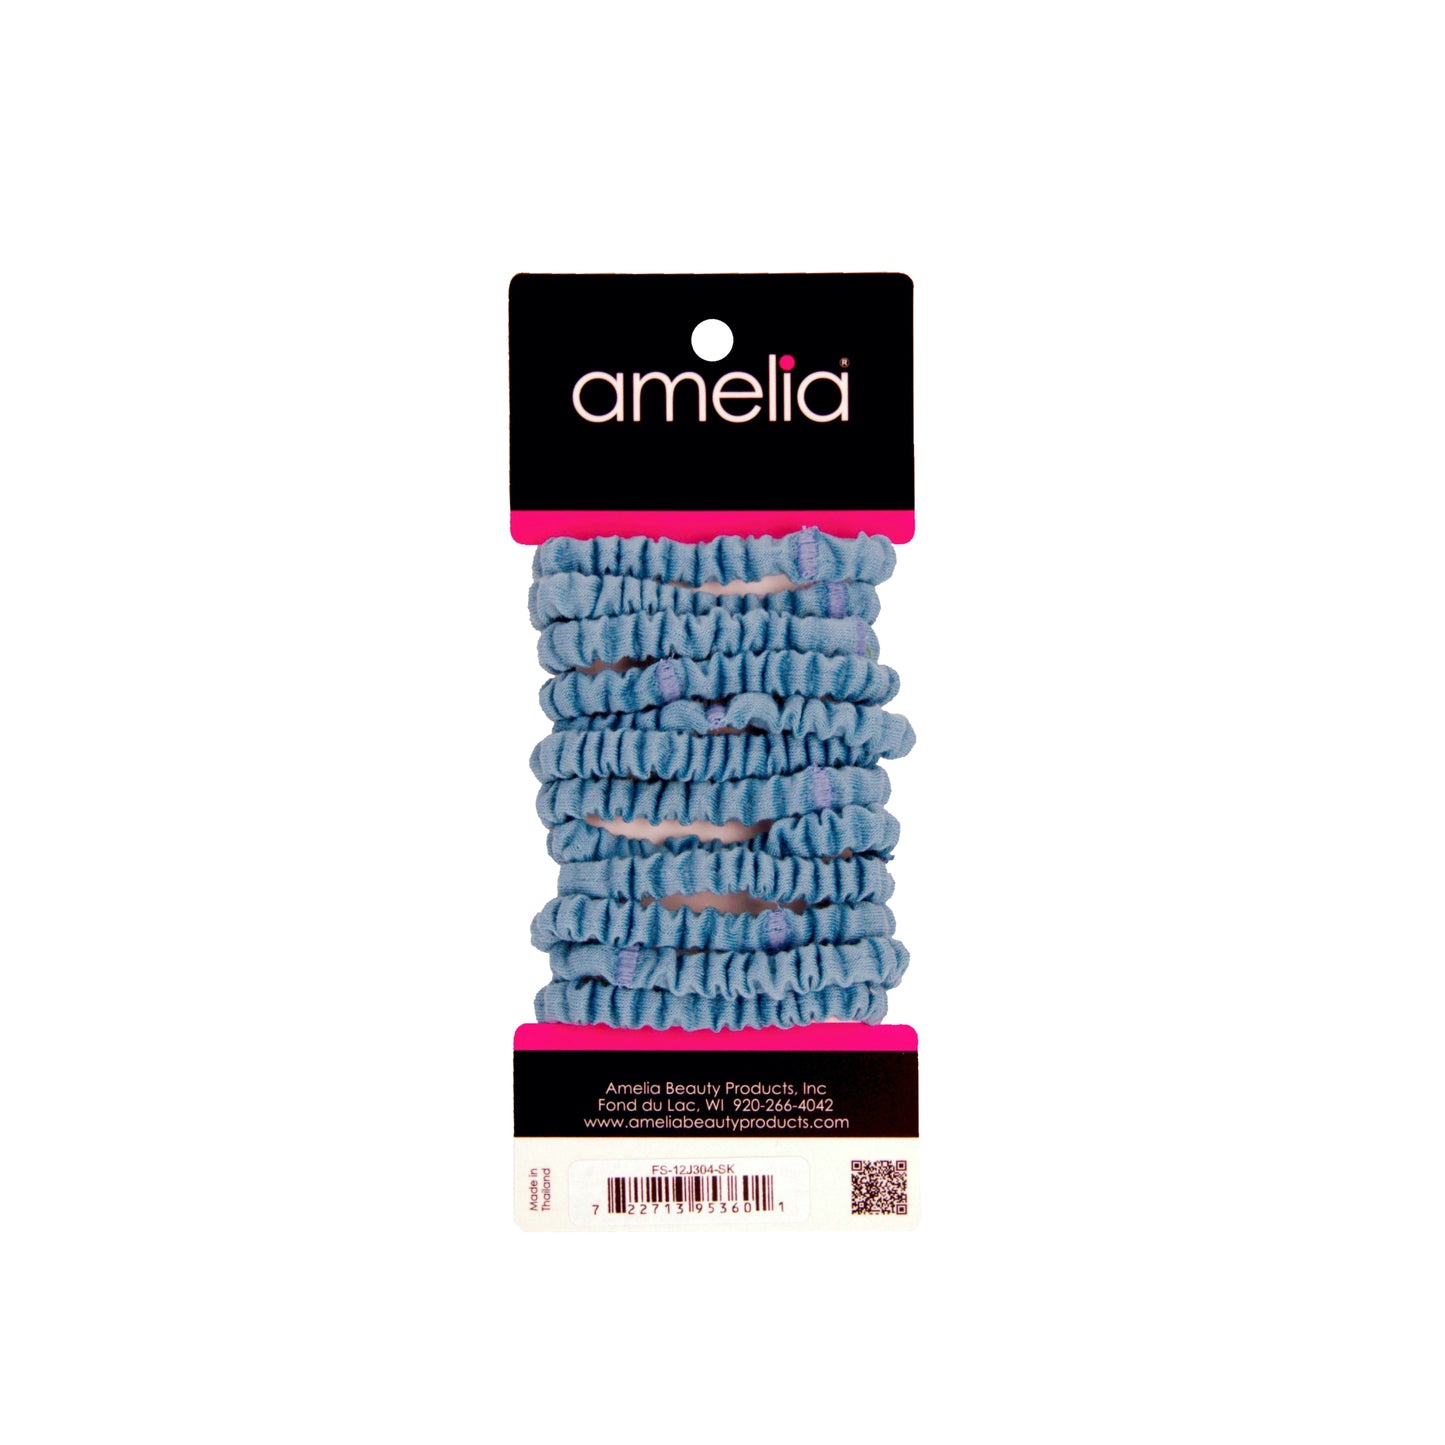 Amelia Beauty, Sky Blue Skinny Jersey Scrunchies, 2.125in Diameter, Gentle on Hair, Strong Hold, No Snag, No Dents or Creases. 12 Pack